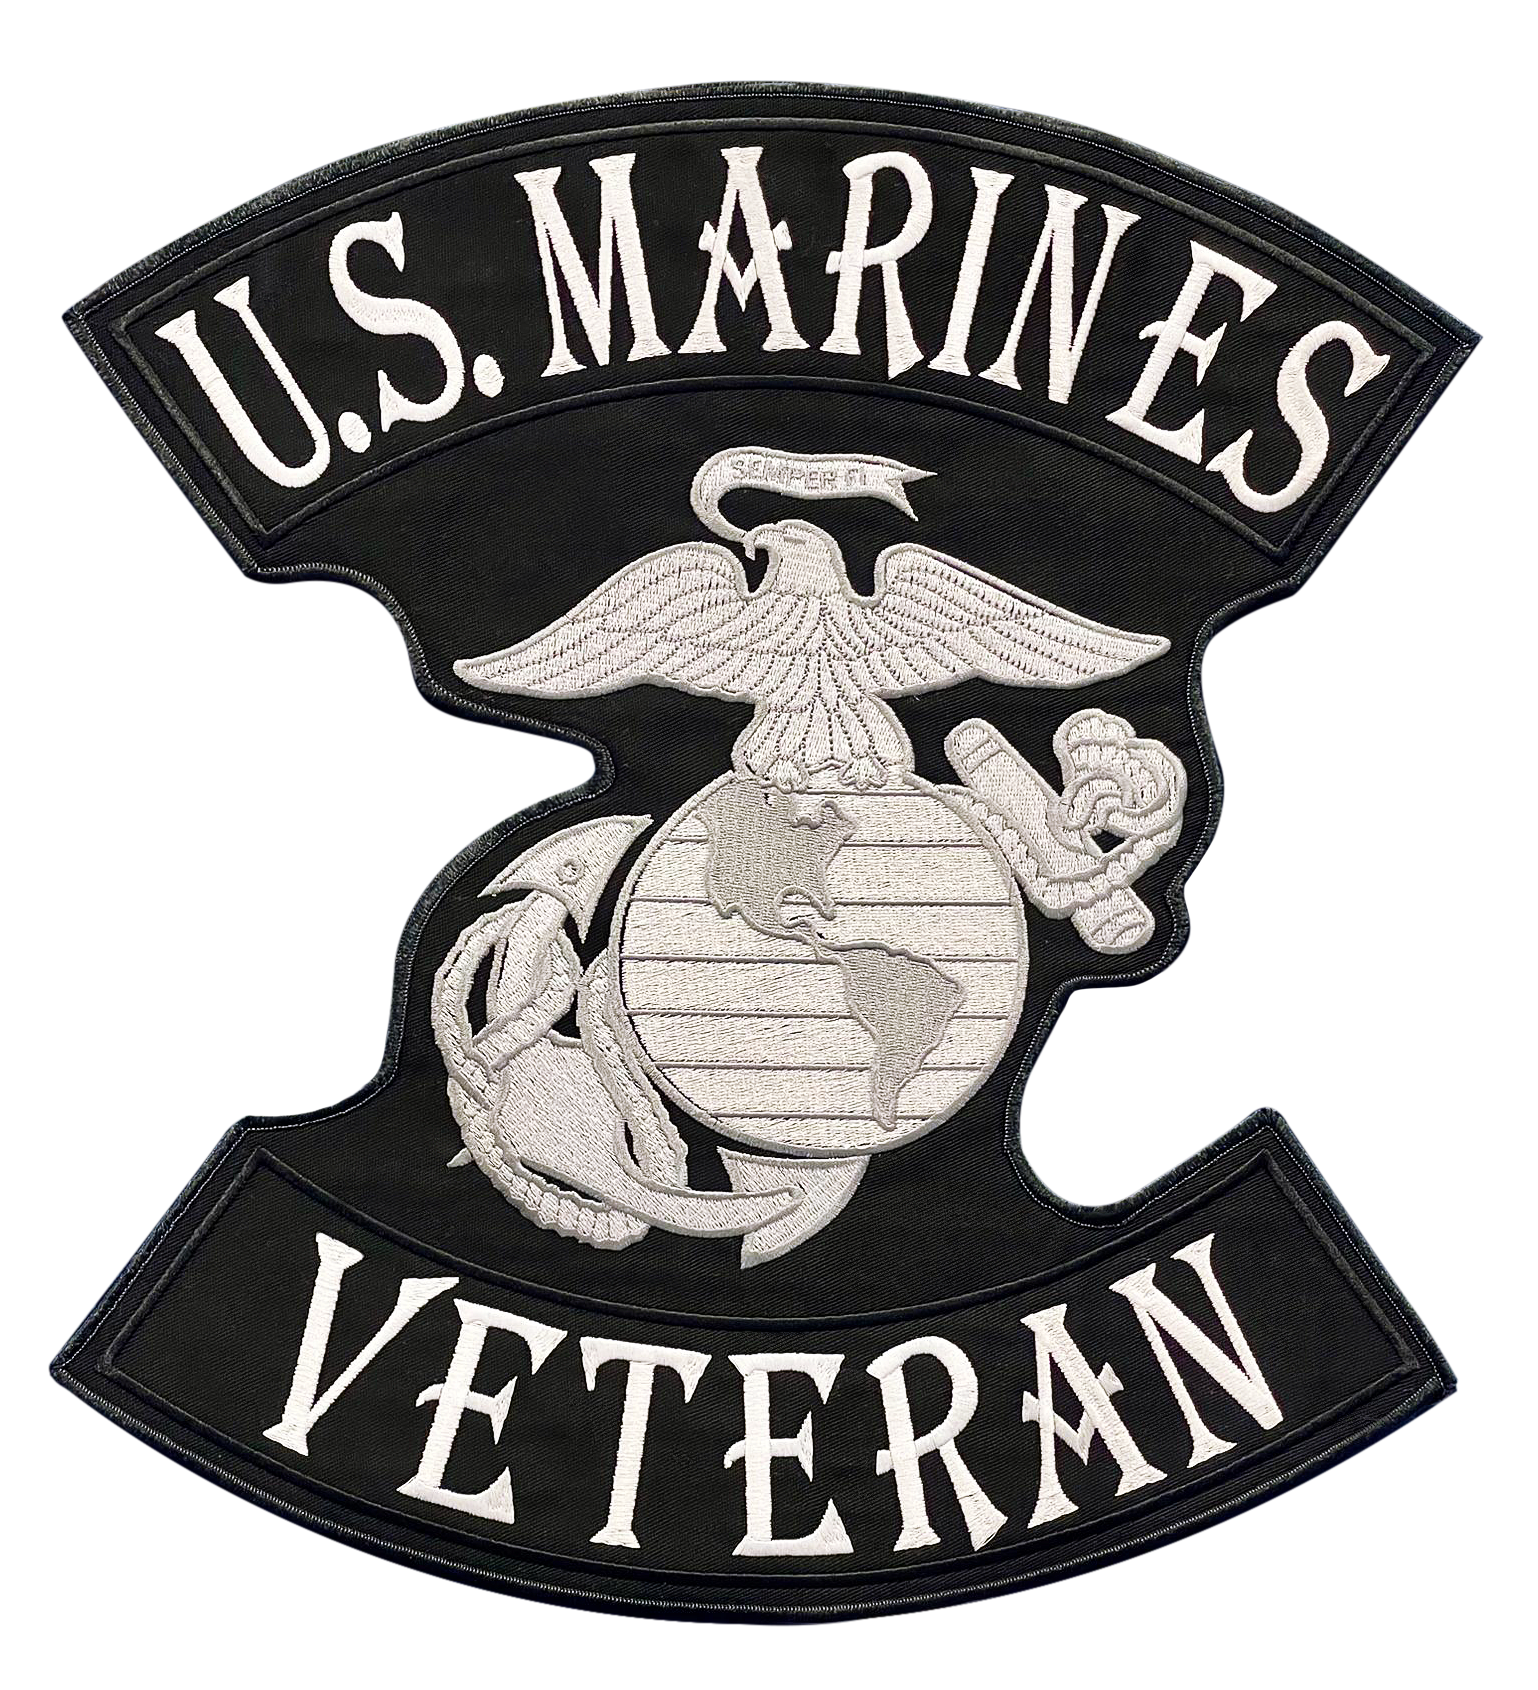 A u.s. marines veteran patch with an eagle on it